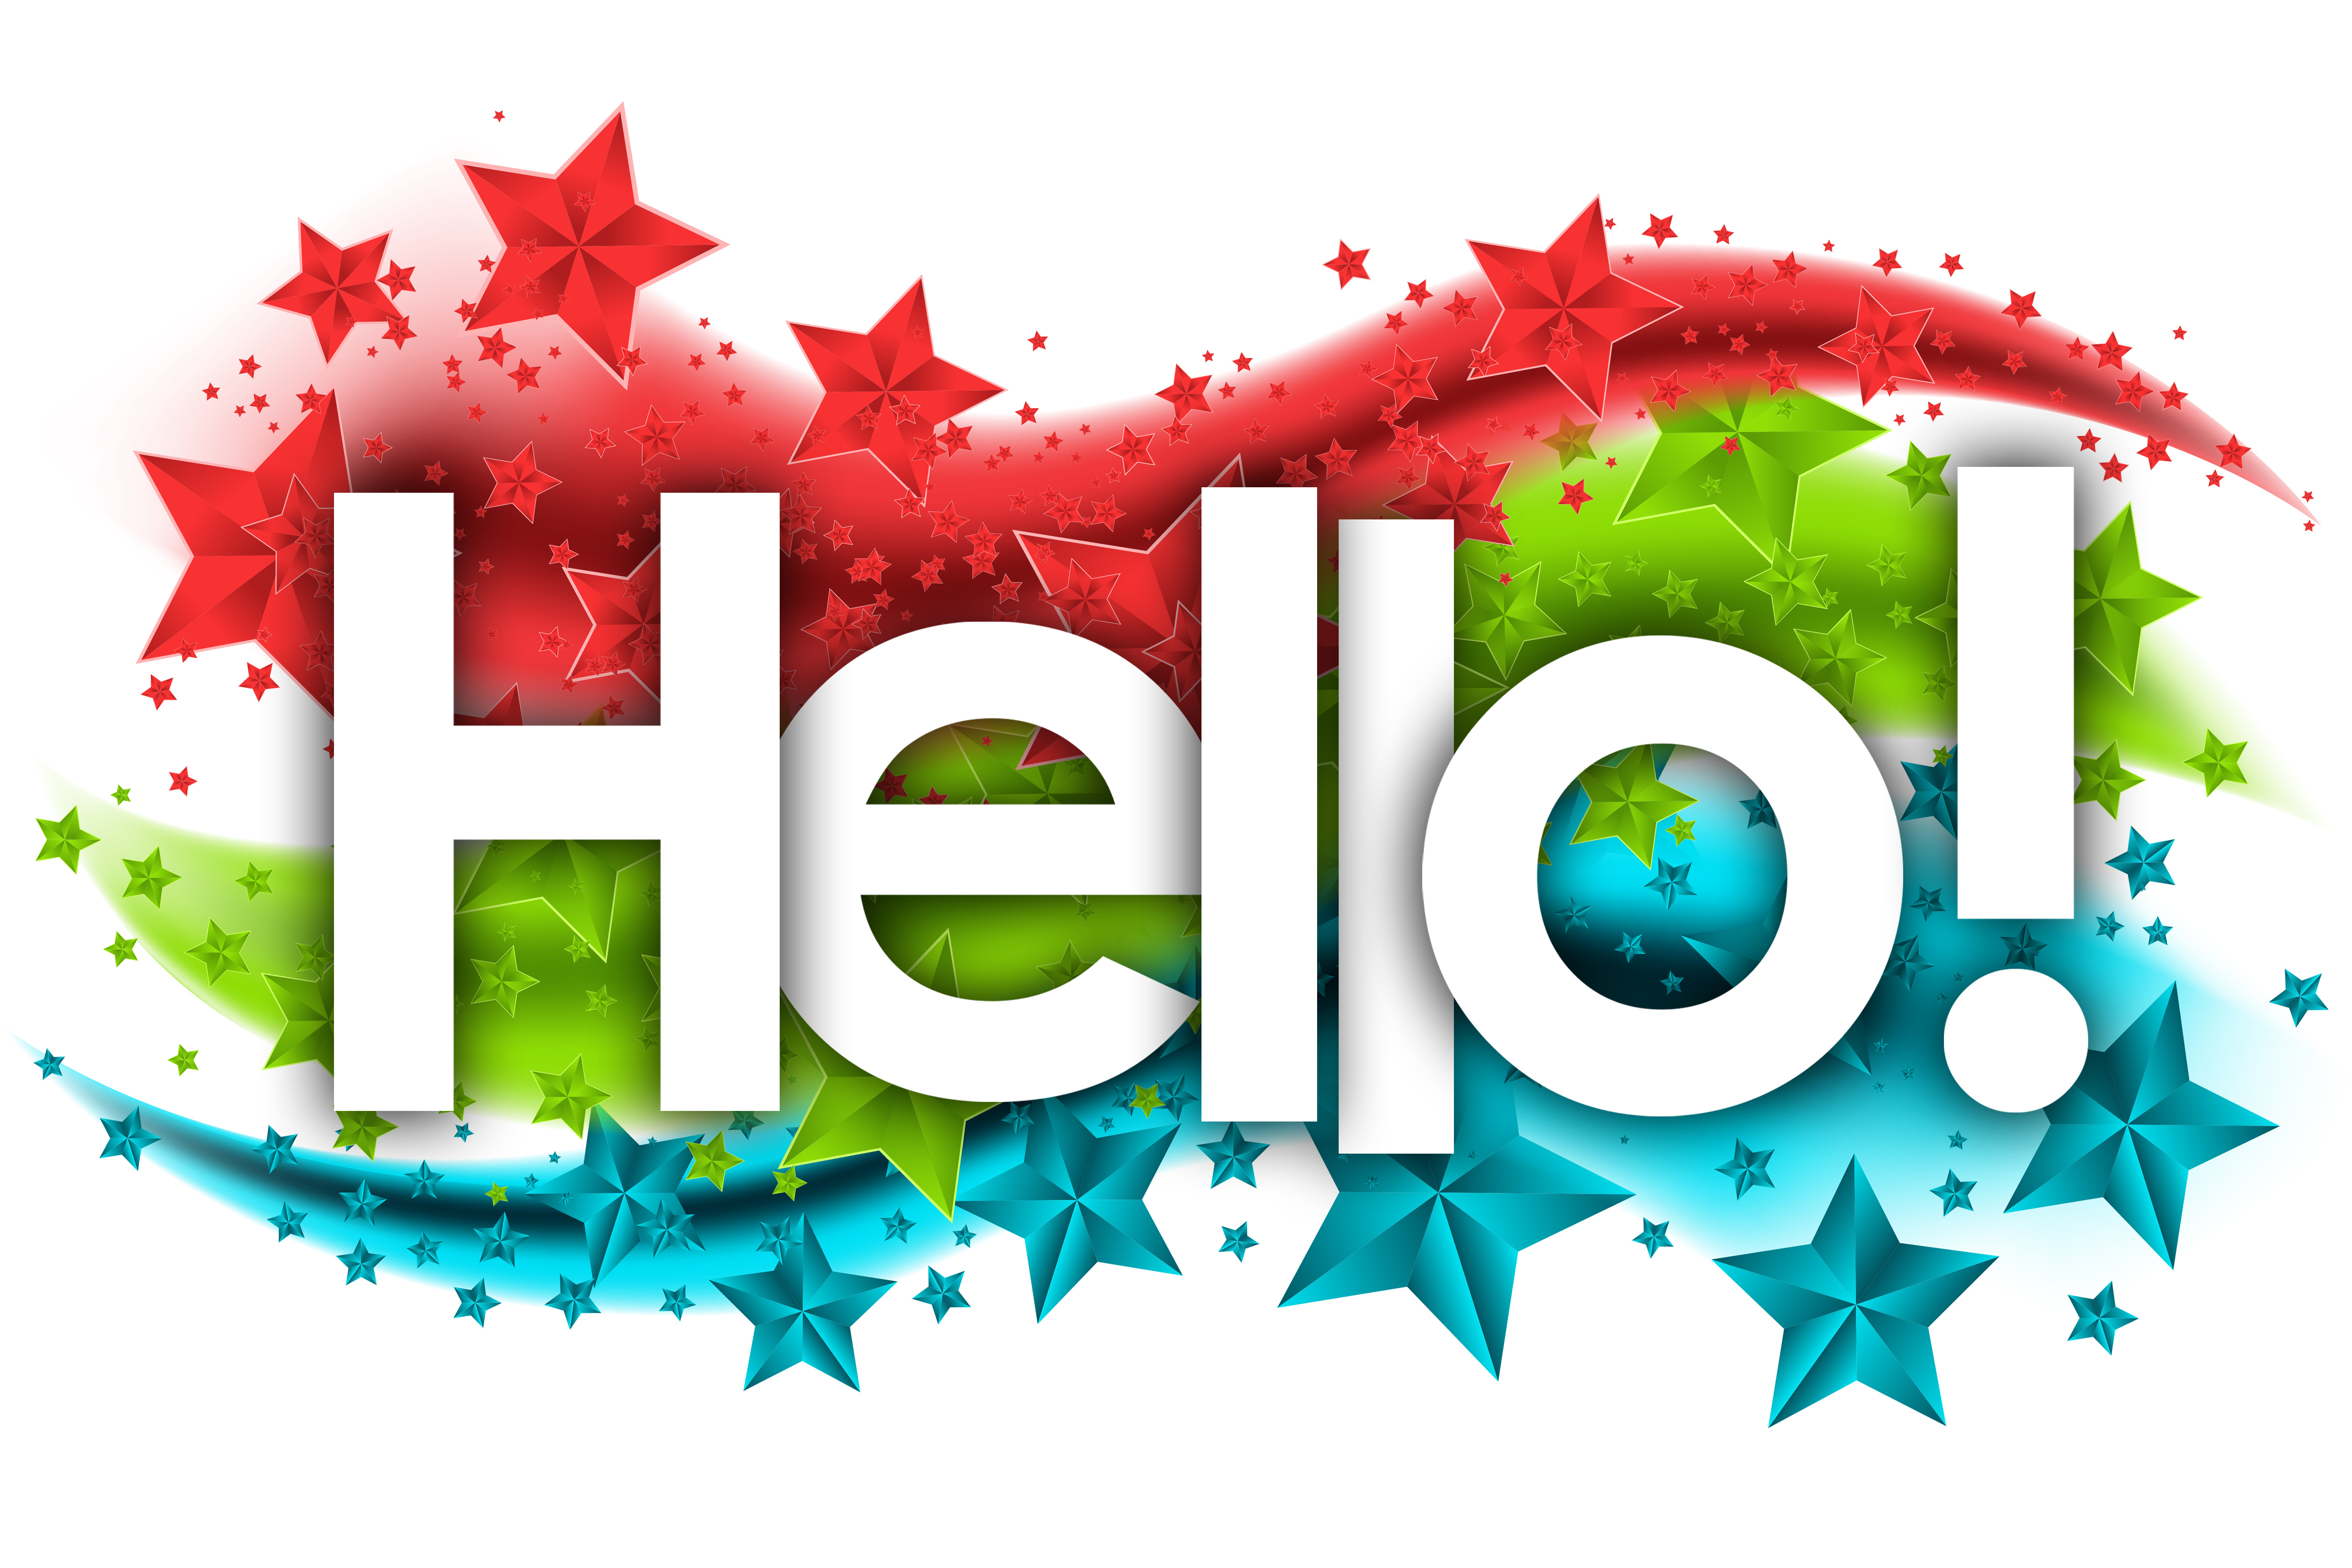 Hello! with a background of red, green and blue stars